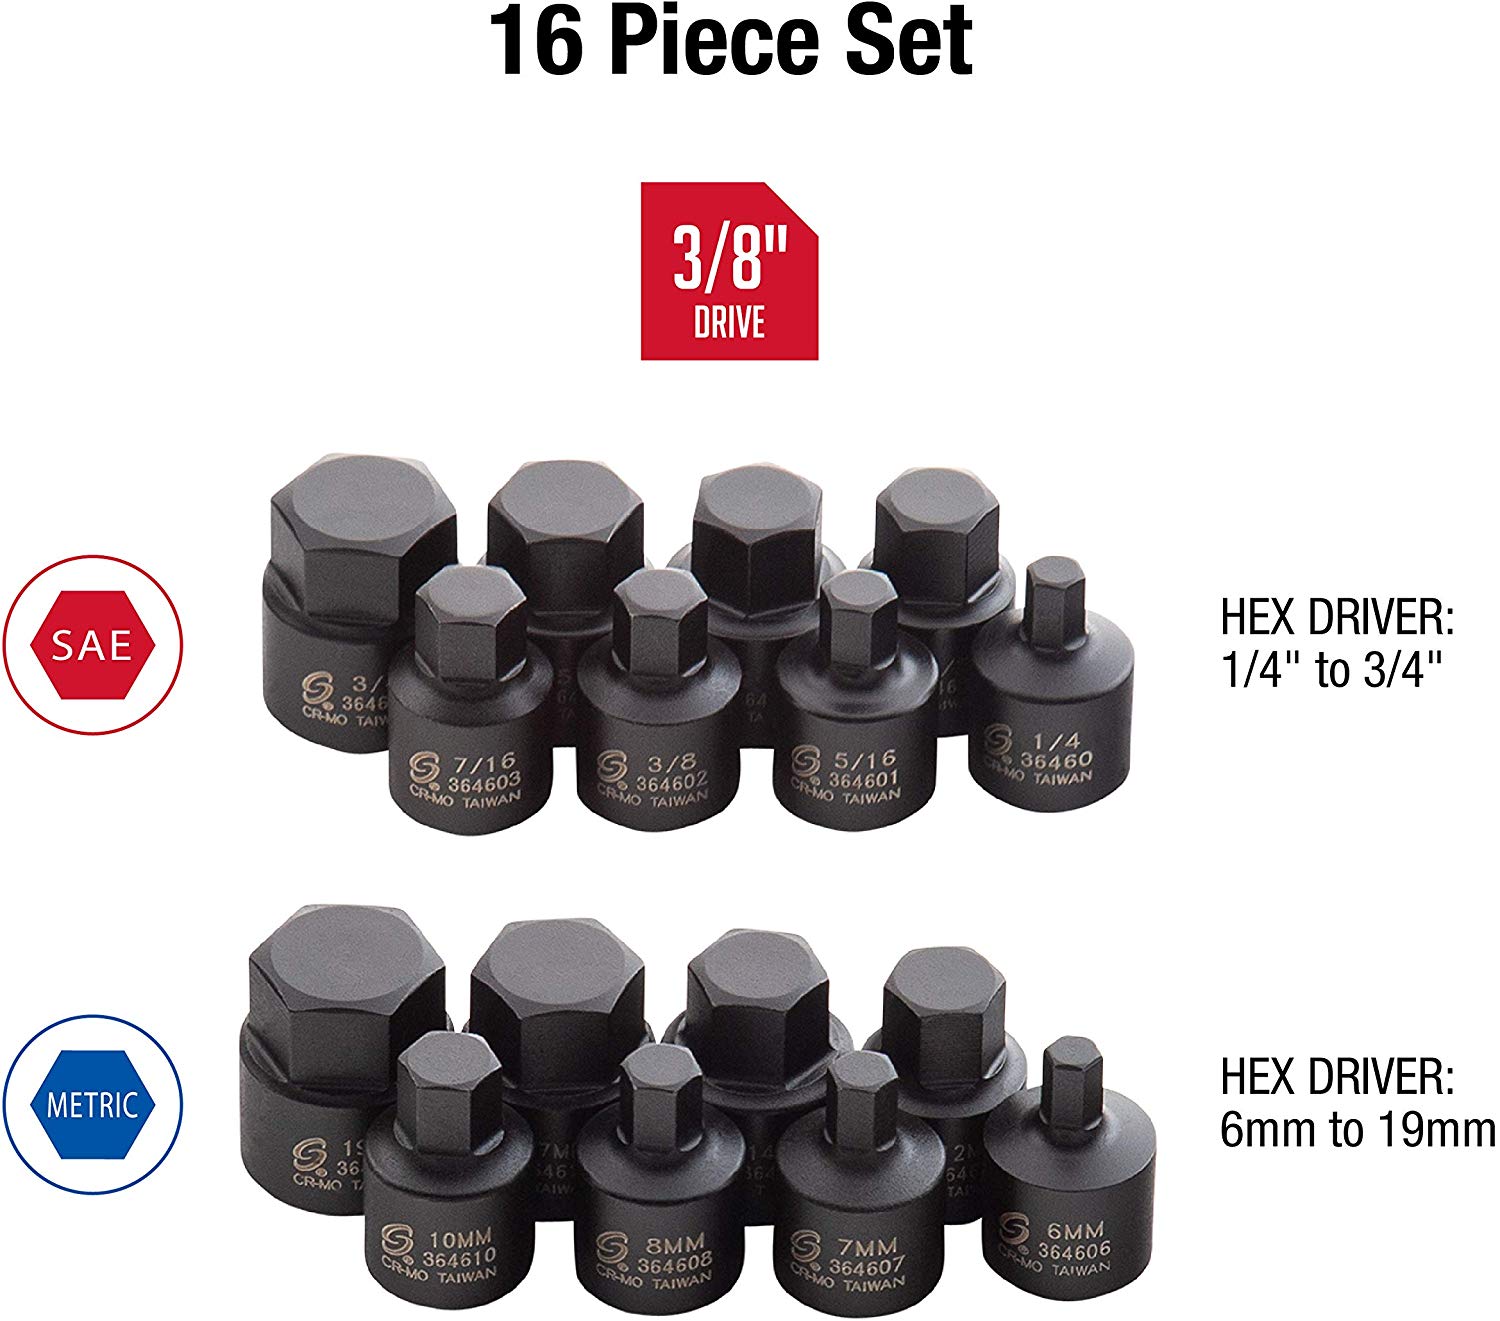 Sunex 3646. 3/8 Inch Drive Low Profile Impact Hex Driver Set. 16-Piece. SAE/Metric. 1/4 Inch - 3/4 Inch. 6mm - 19mm. Cr-Mo Steel. Dual Size Markings. Heavy Duty Storage Case. Meets ANSI Stand